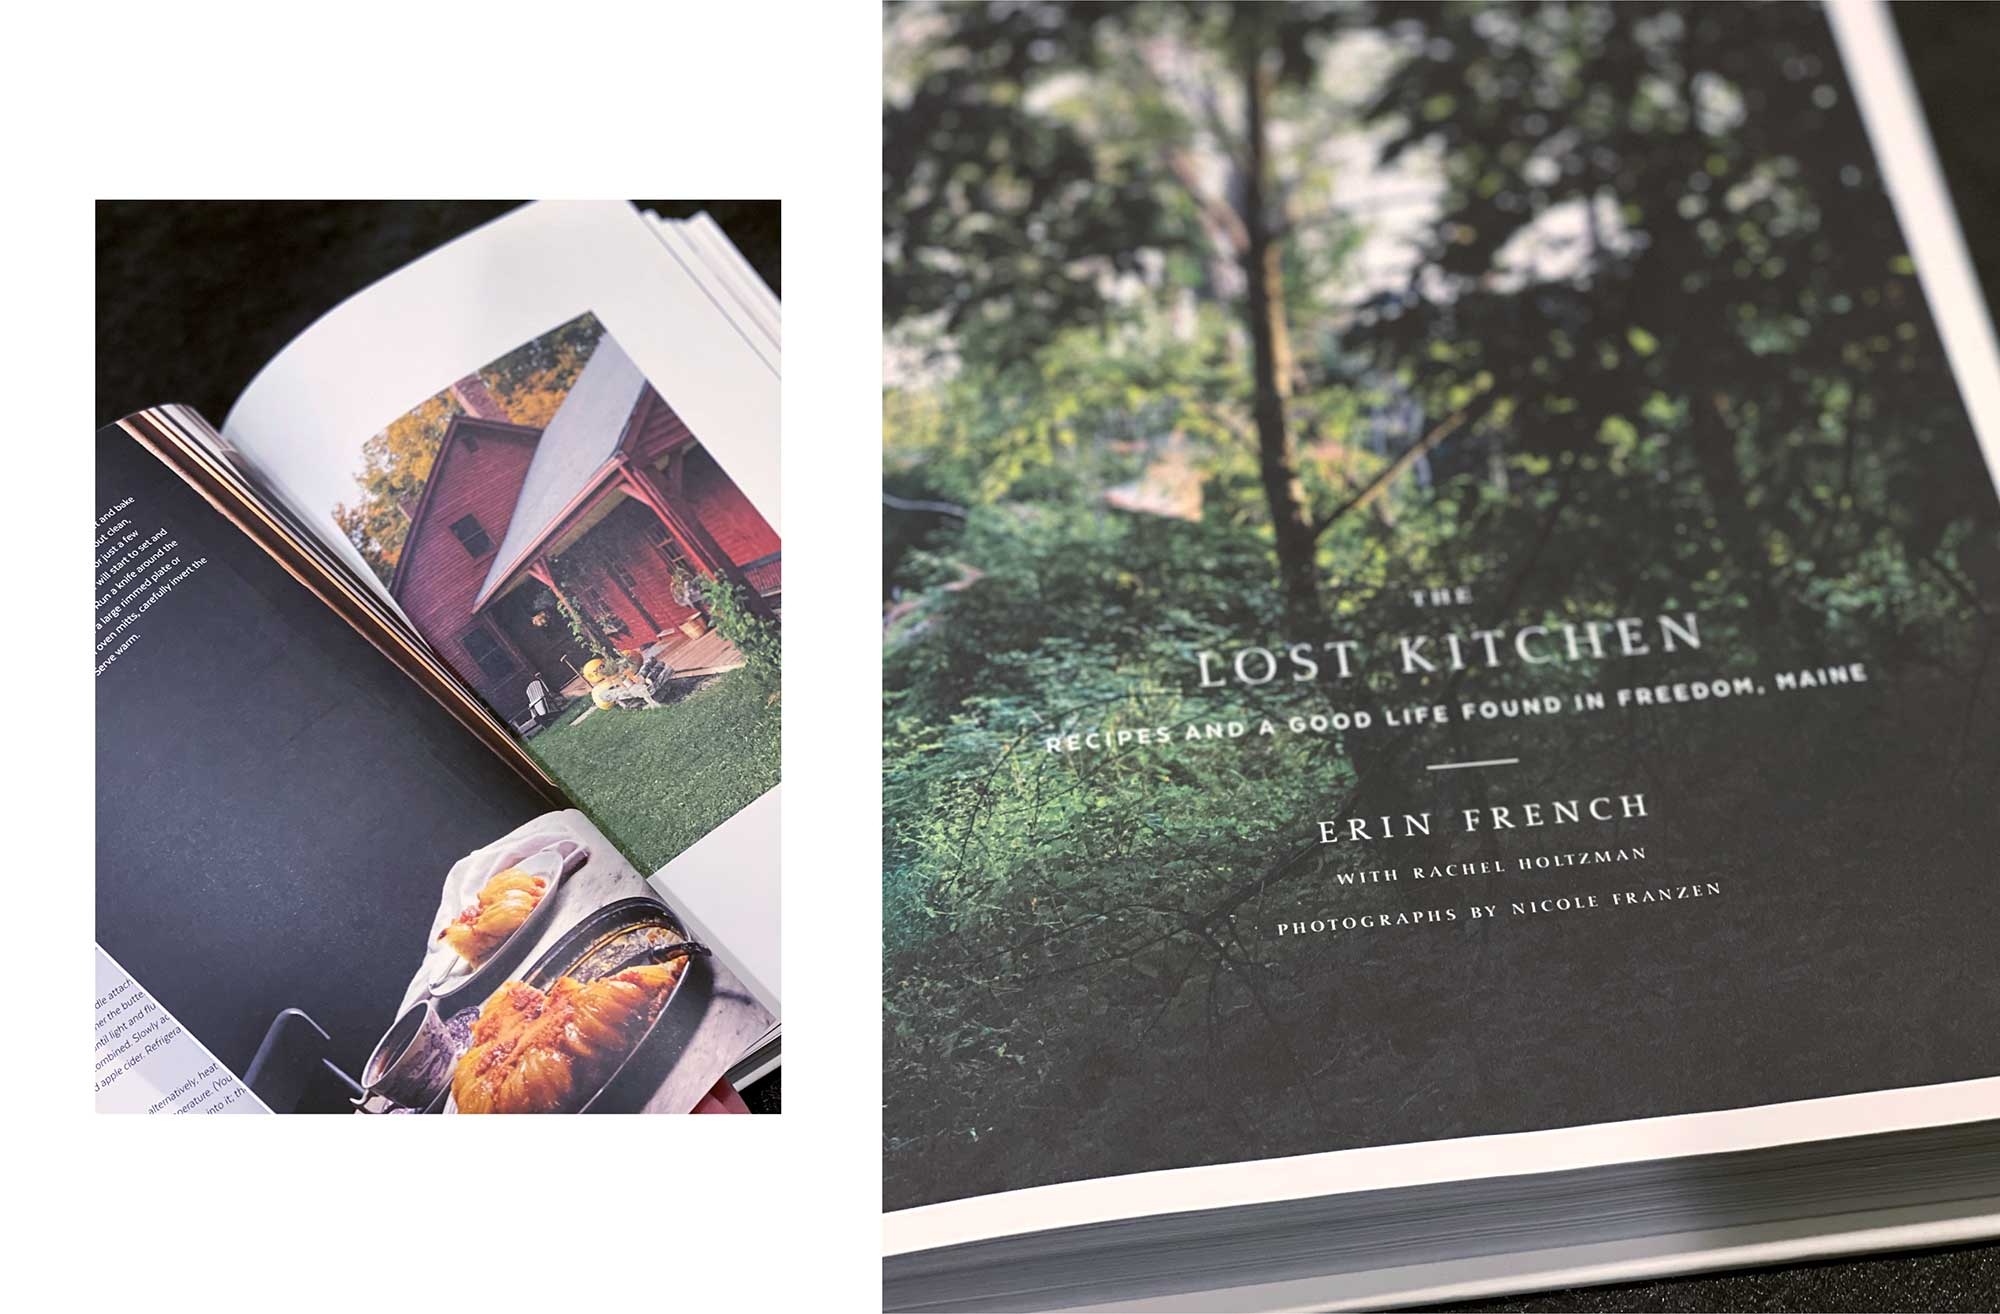 The Lost Kitchen still photographs from within the cookbook